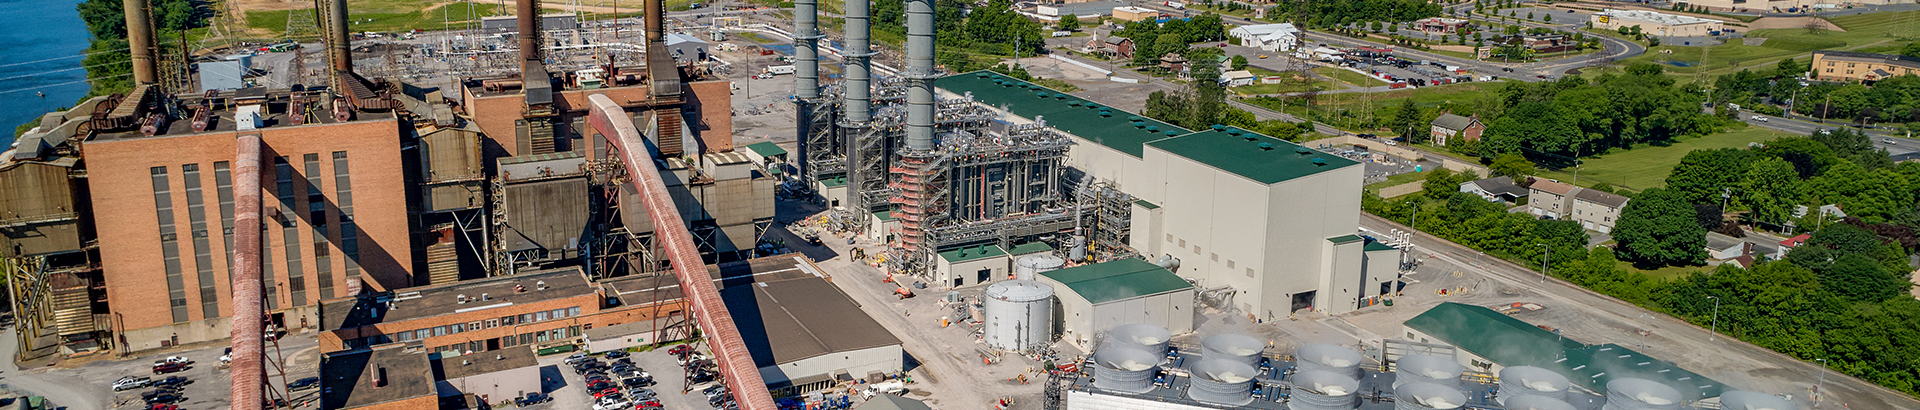 Hummel Combined Cycle Power Plant